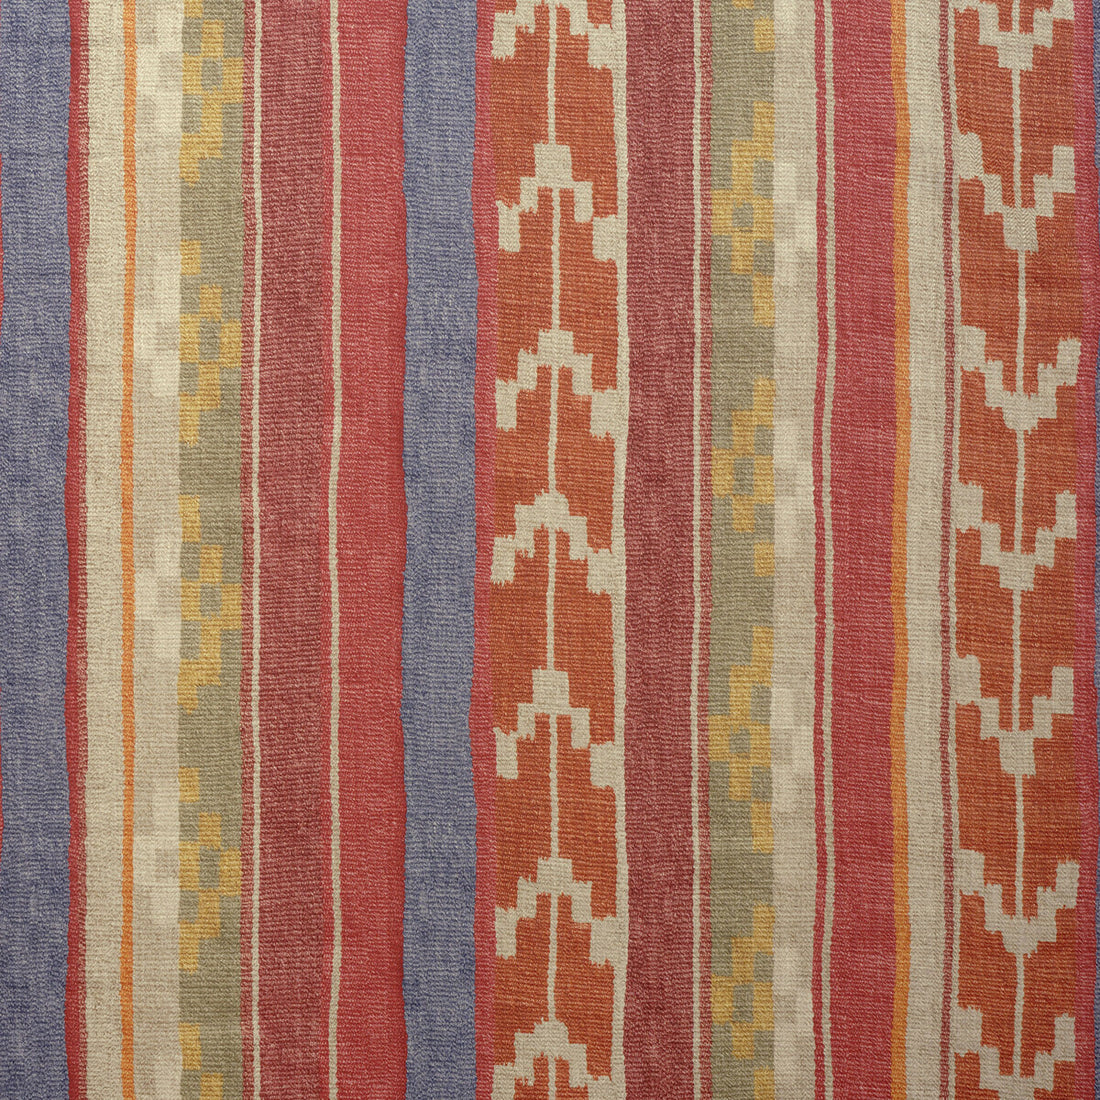 Indus fabric in brick color - pattern AM100338.912.0 - by Kravet Couture in the Andrew Martin Hindukush collection